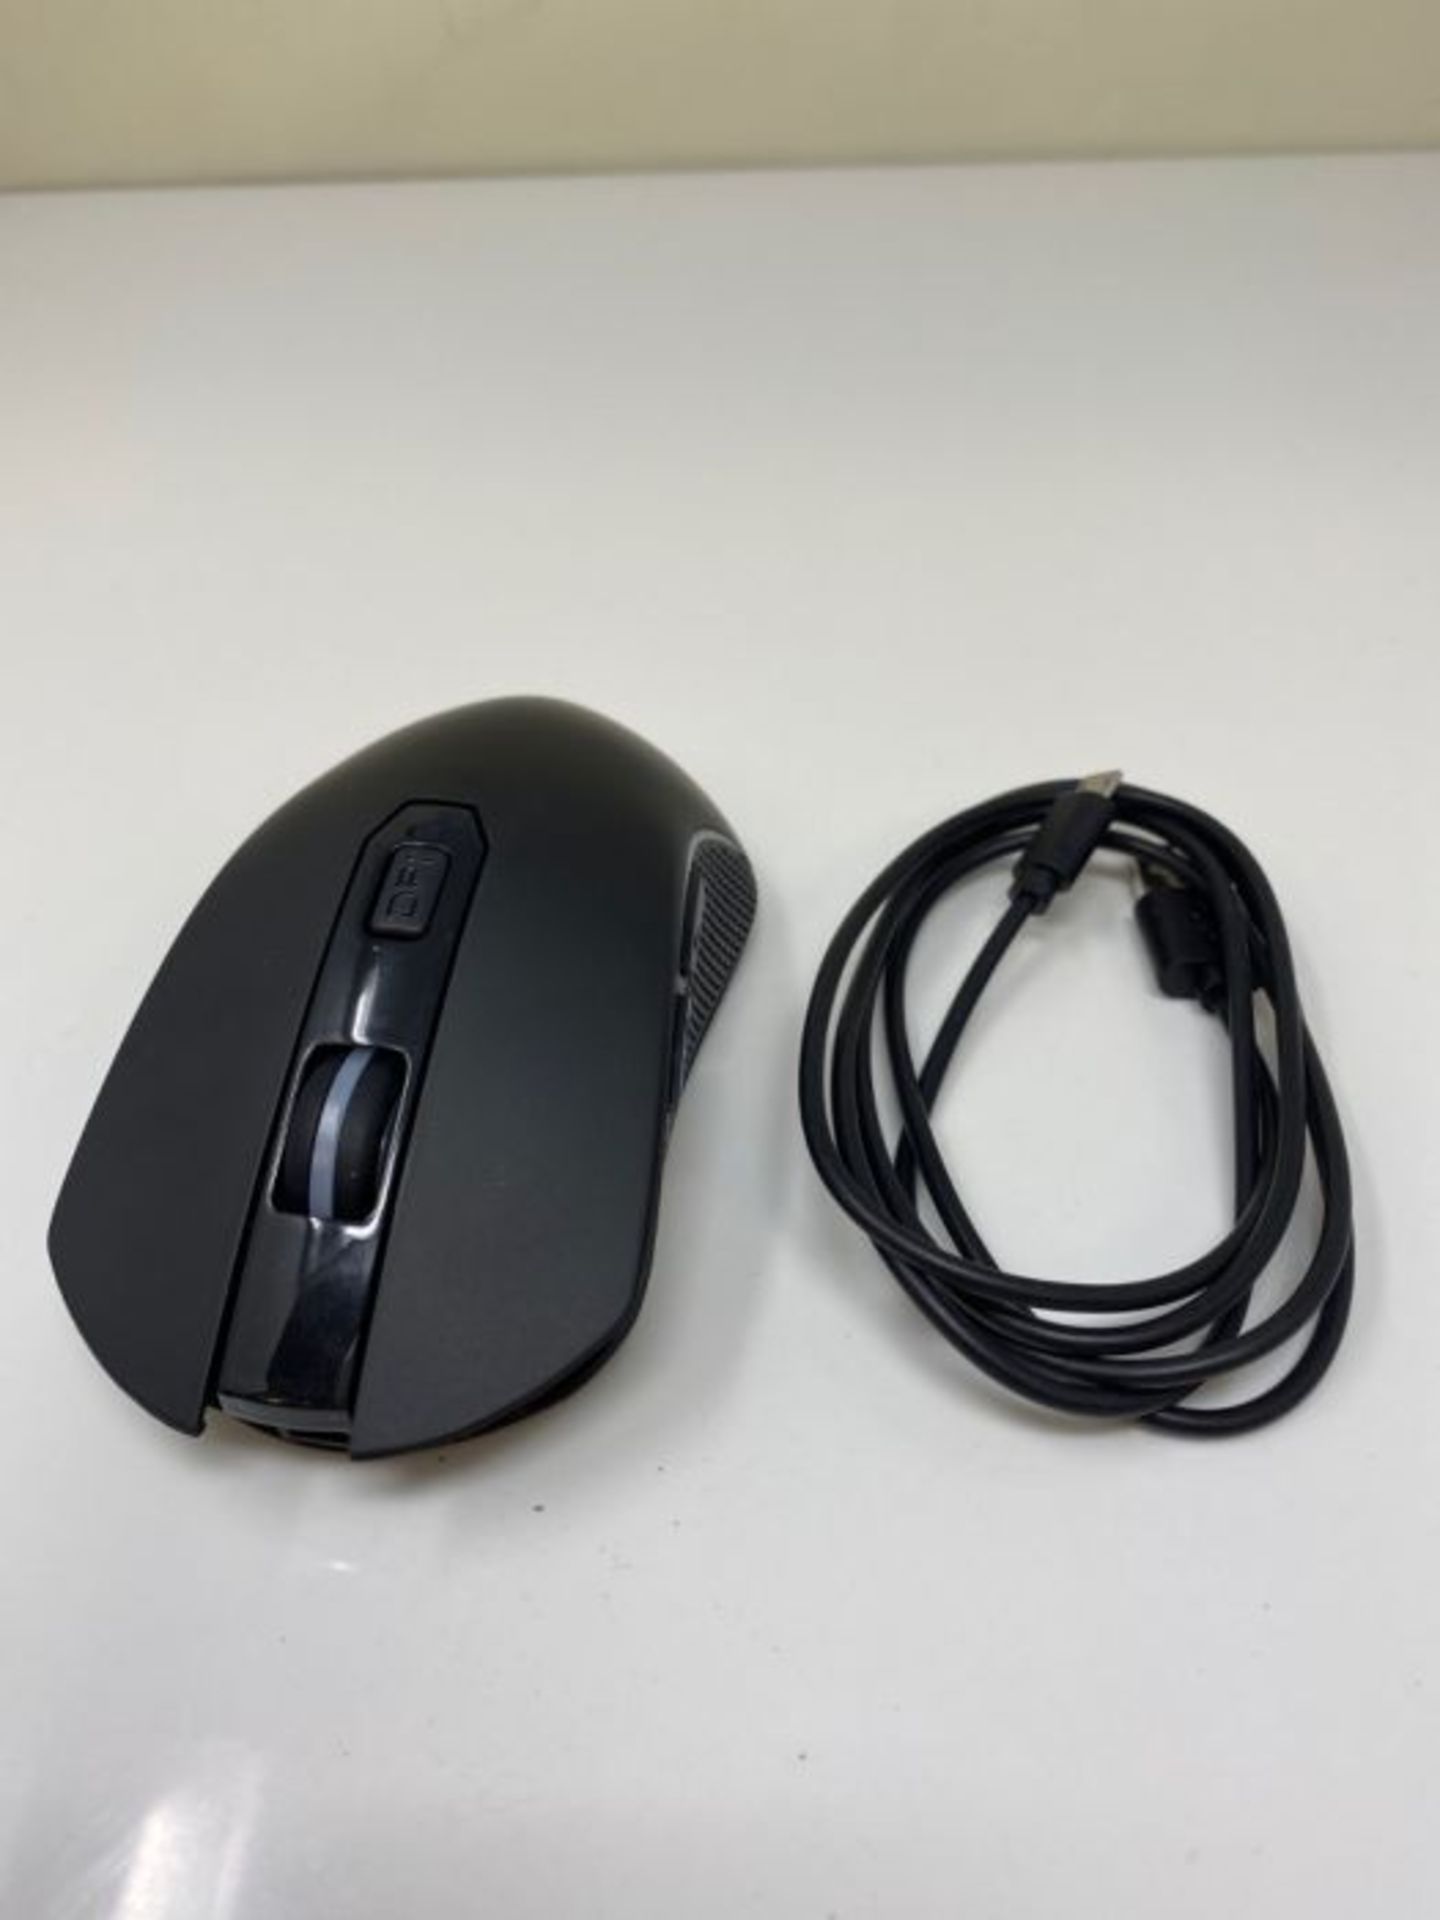 G-LAB Kult XENON Rechargeable Wireless Gaming Mouse - High Performance 5000 DPI Wirele - Image 3 of 3